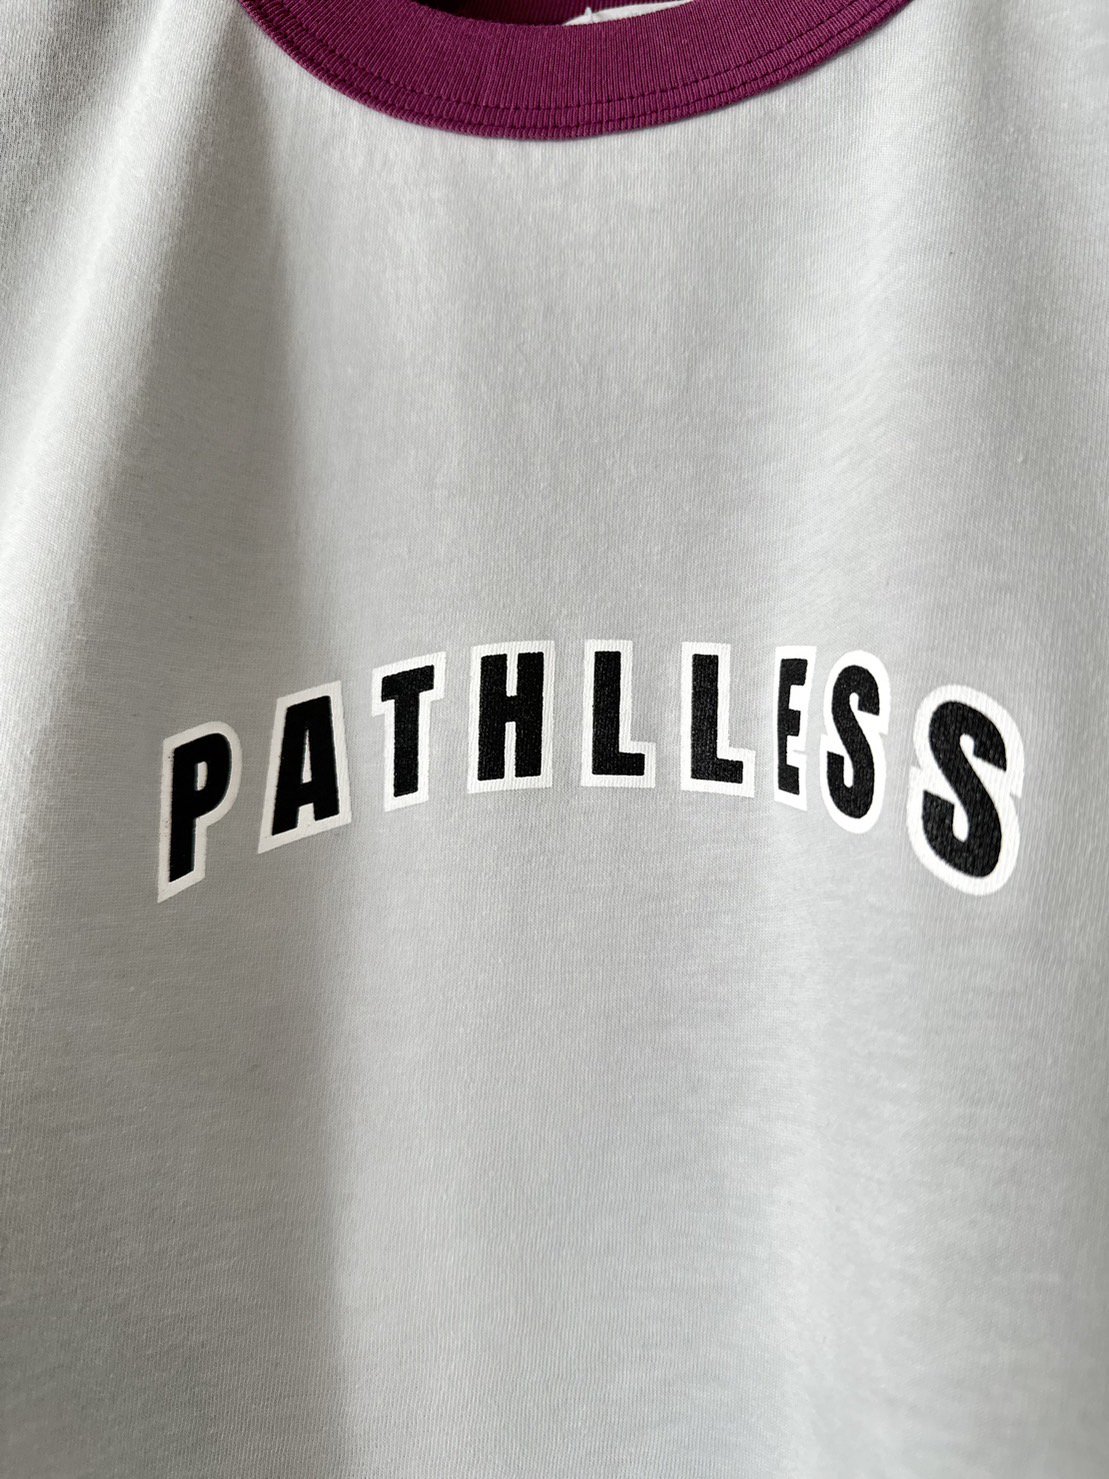 LITTLEBIG<br />[30%off] PATHLESS TS / Grey <img class='new_mark_img2' src='https://img.shop-pro.jp/img/new/icons20.gif' style='border:none;display:inline;margin:0px;padding:0px;width:auto;' />